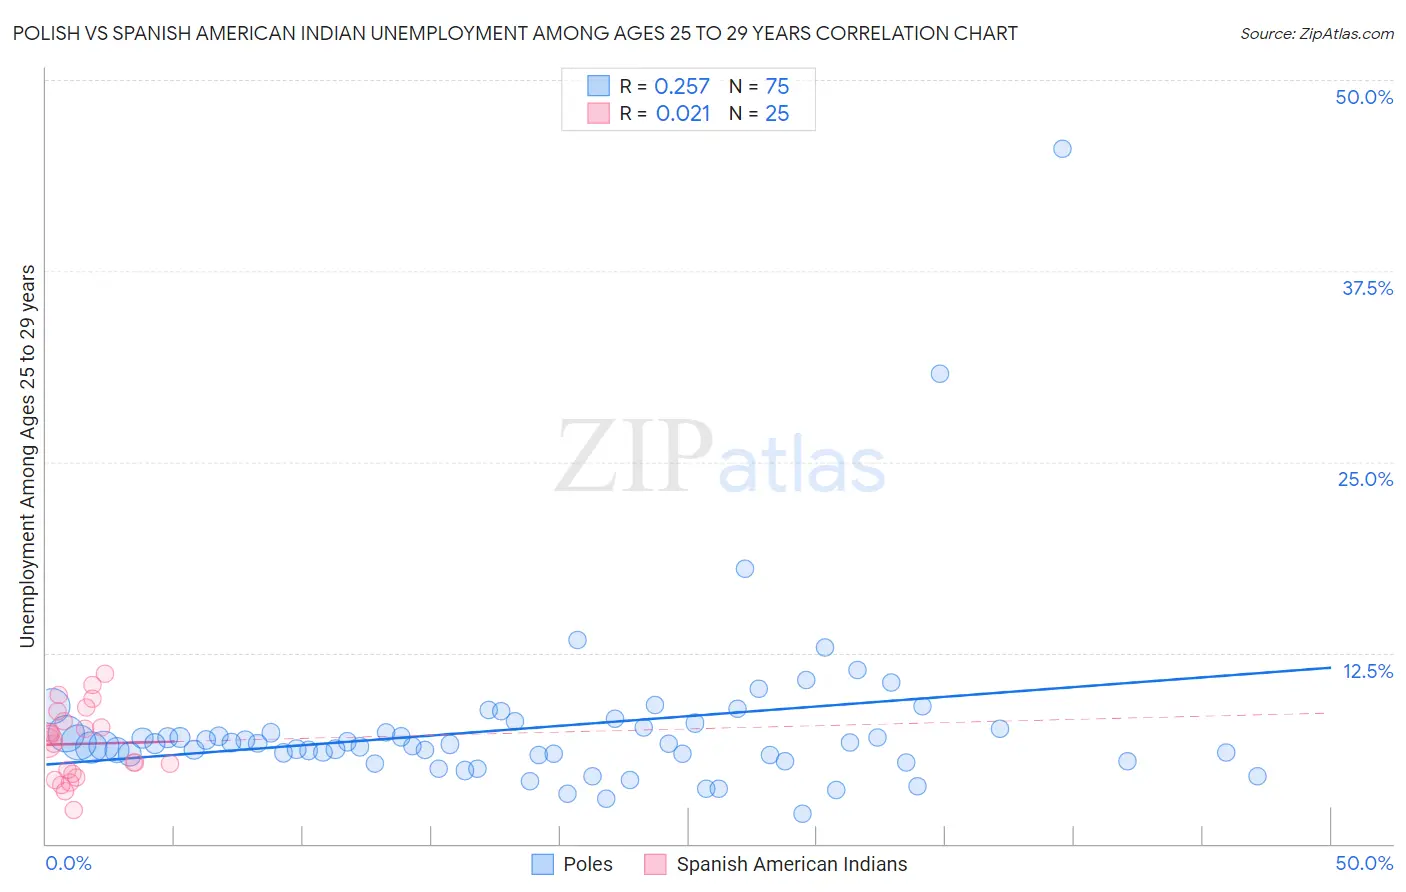 Polish vs Spanish American Indian Unemployment Among Ages 25 to 29 years